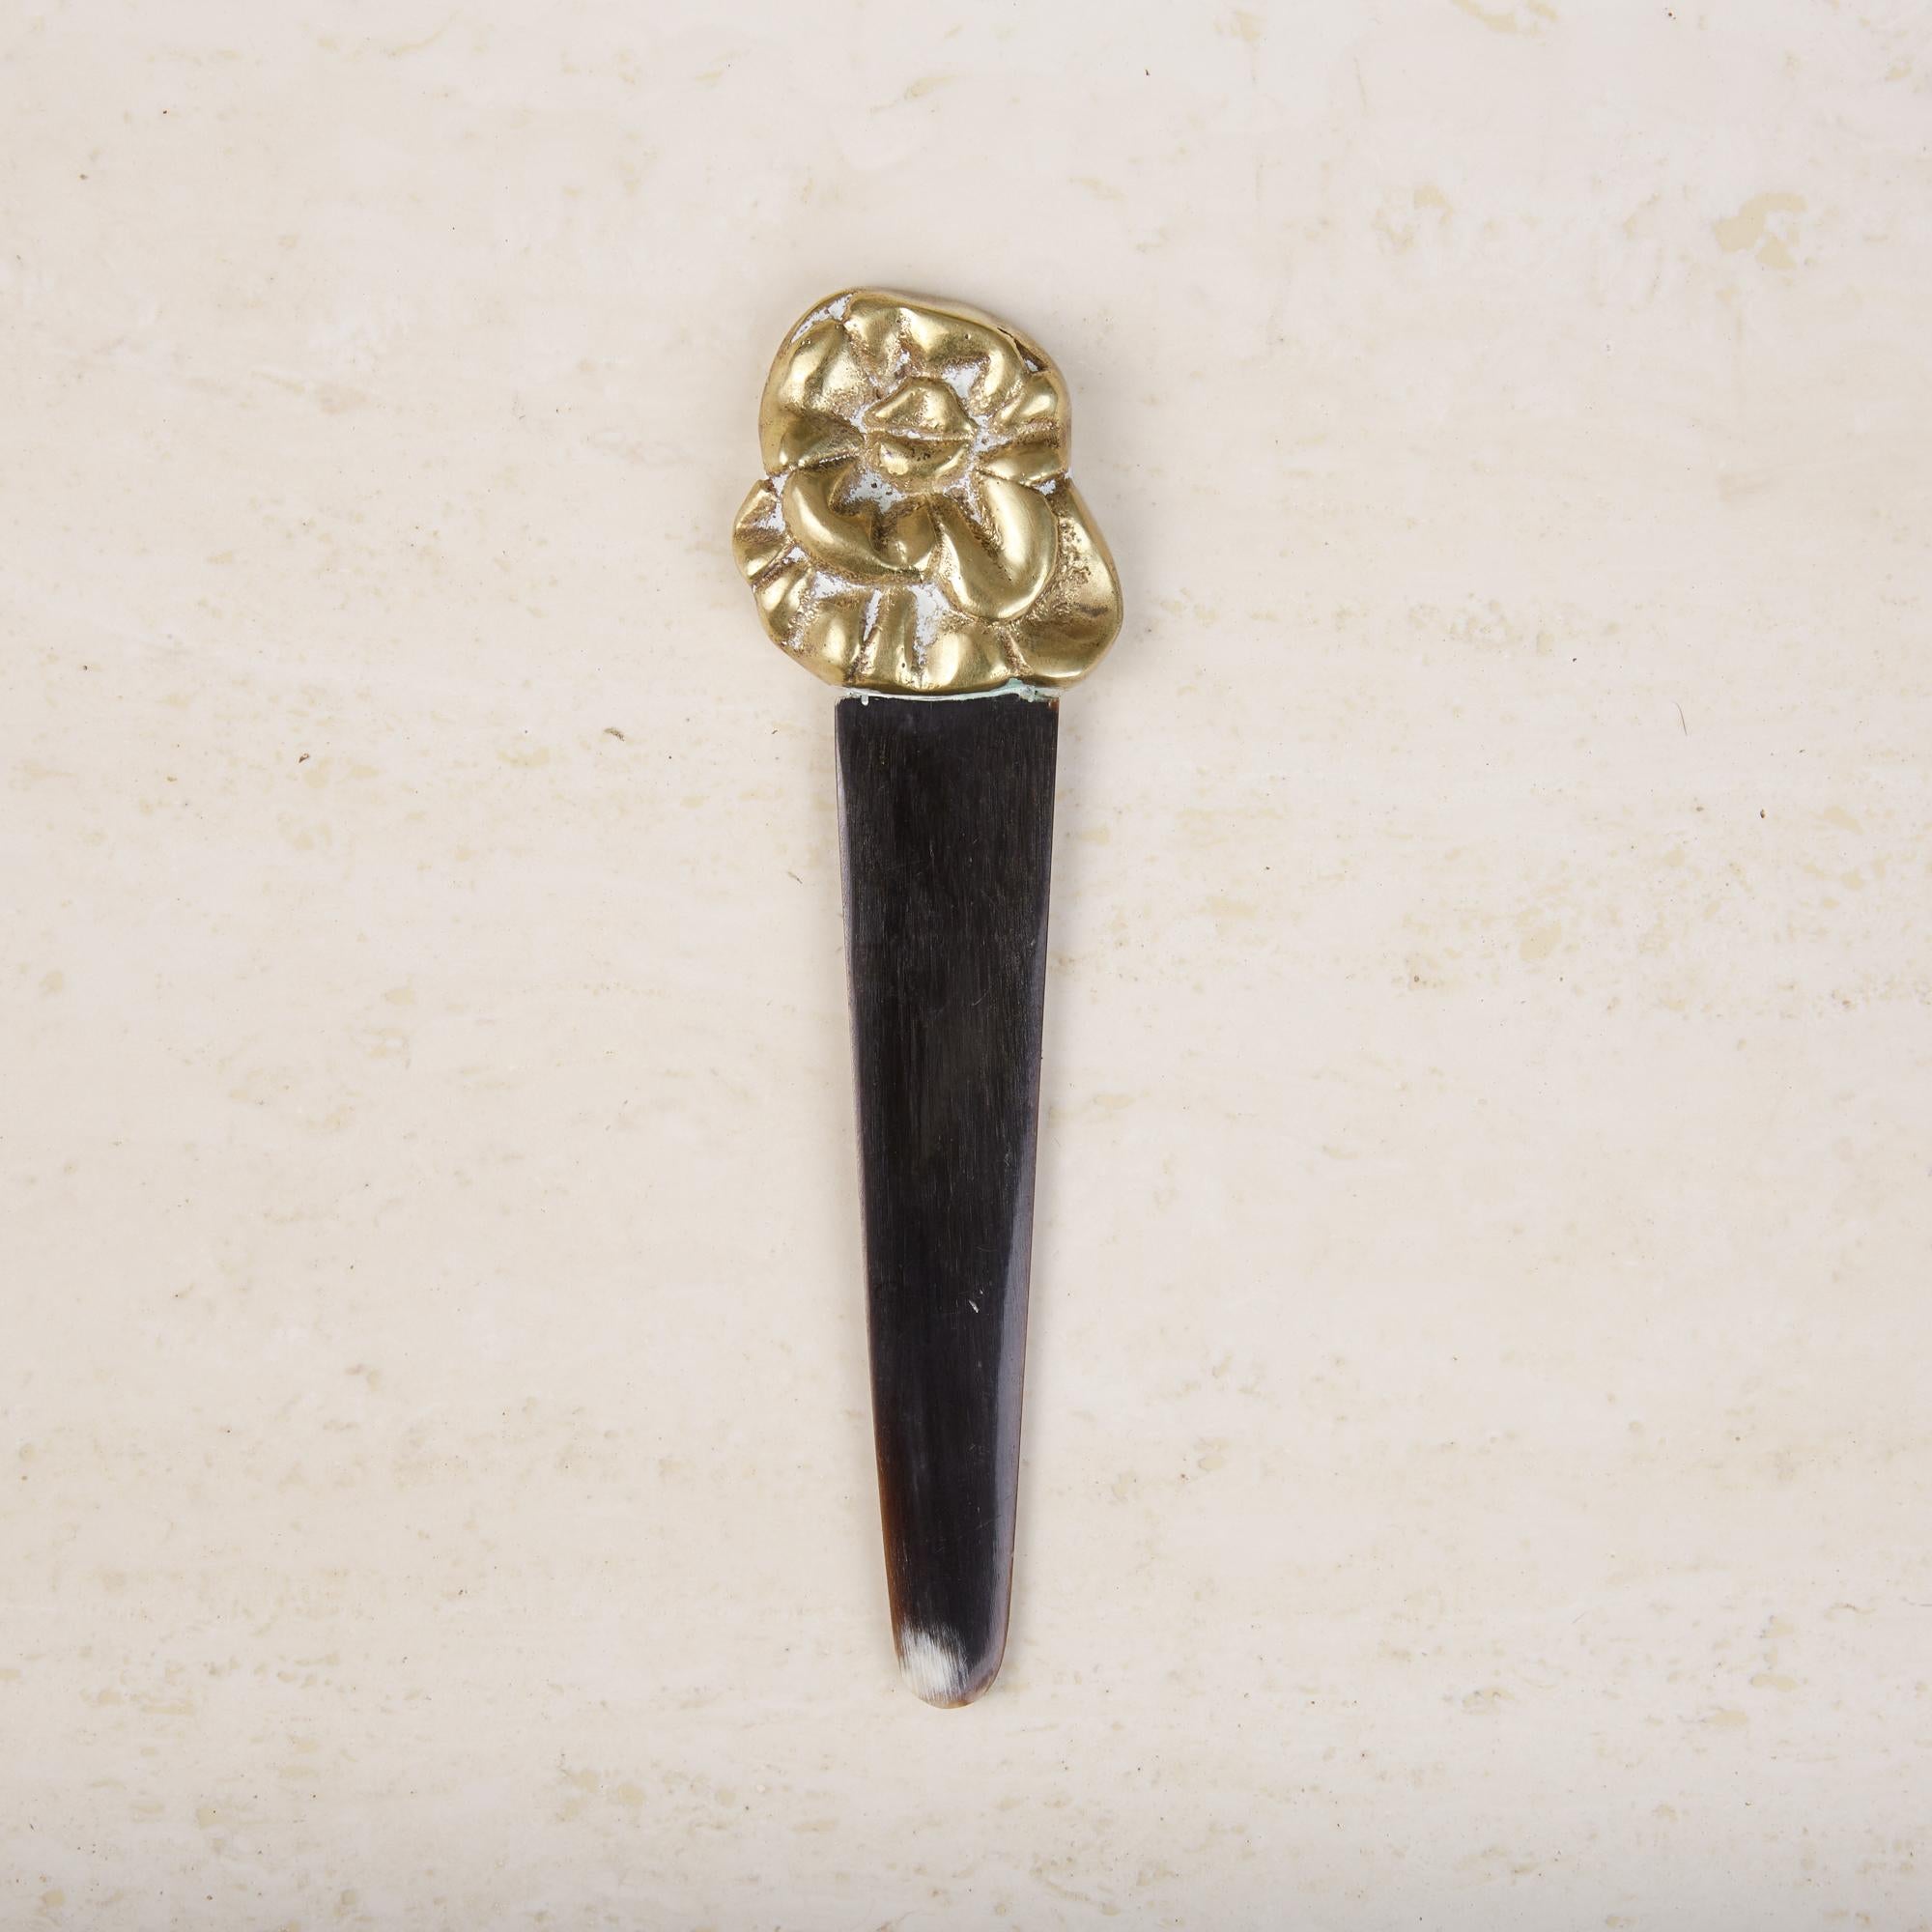 Cast bronze foot letter opener by Italian-Brazilian artist Pietrina Checcacci. The small weighted object features a patinated bronze floral shaped handle with a rounded horn blade. This quirky piece would be the perfect accent for any office